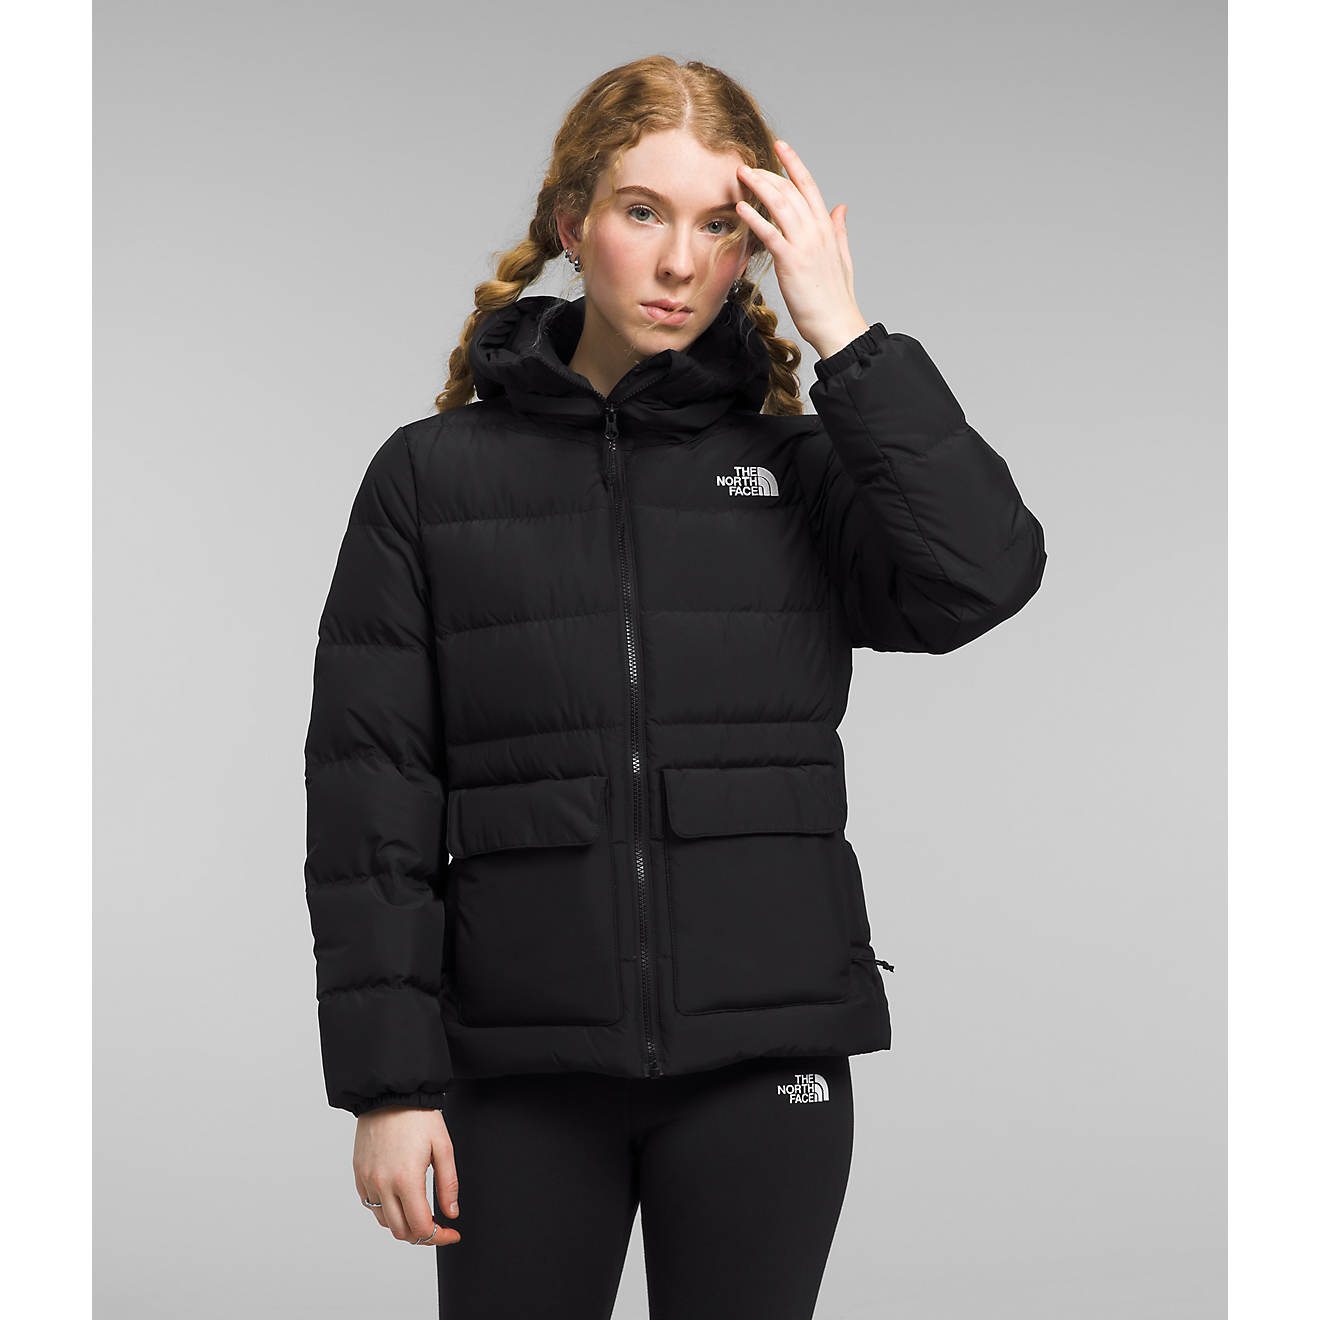 The North Face Women’s Gotham Jacket | Free Shipping at Academy